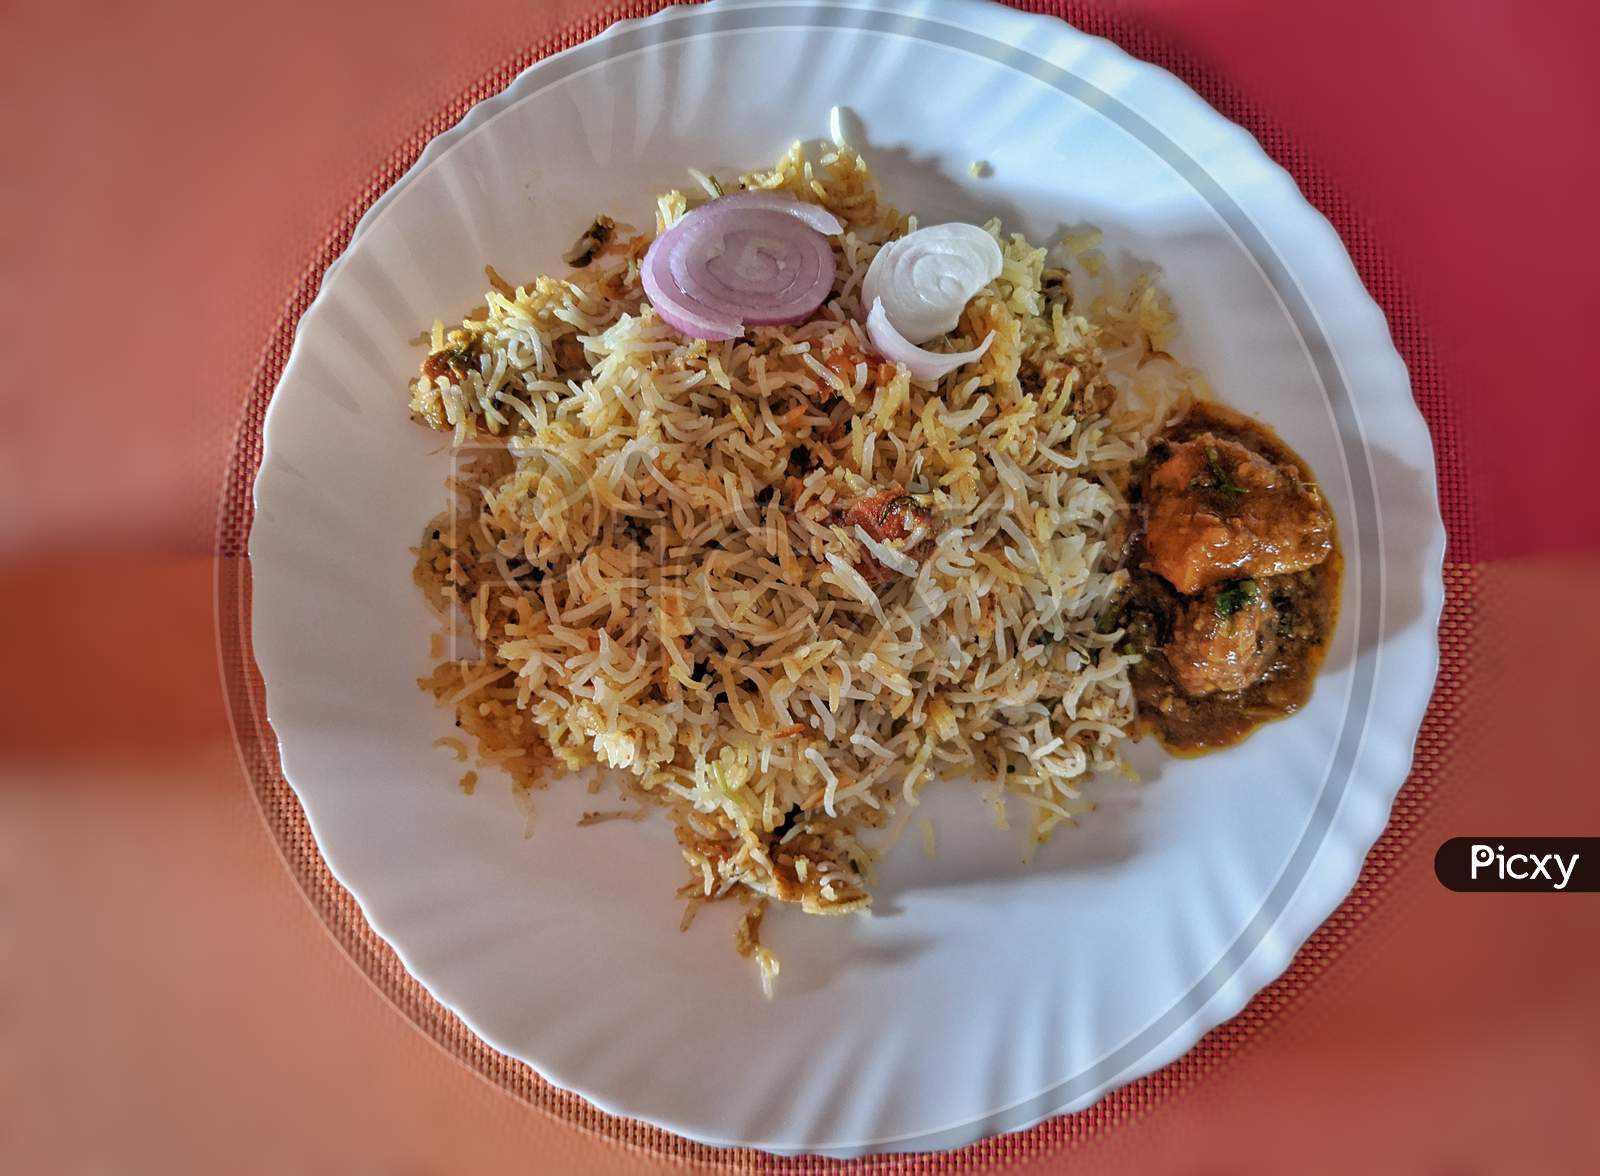 Chicken Biryani Traditional Vegetables Sauce Rice Cafe Indian Cuisine Restaurant Top View With Colorful Background